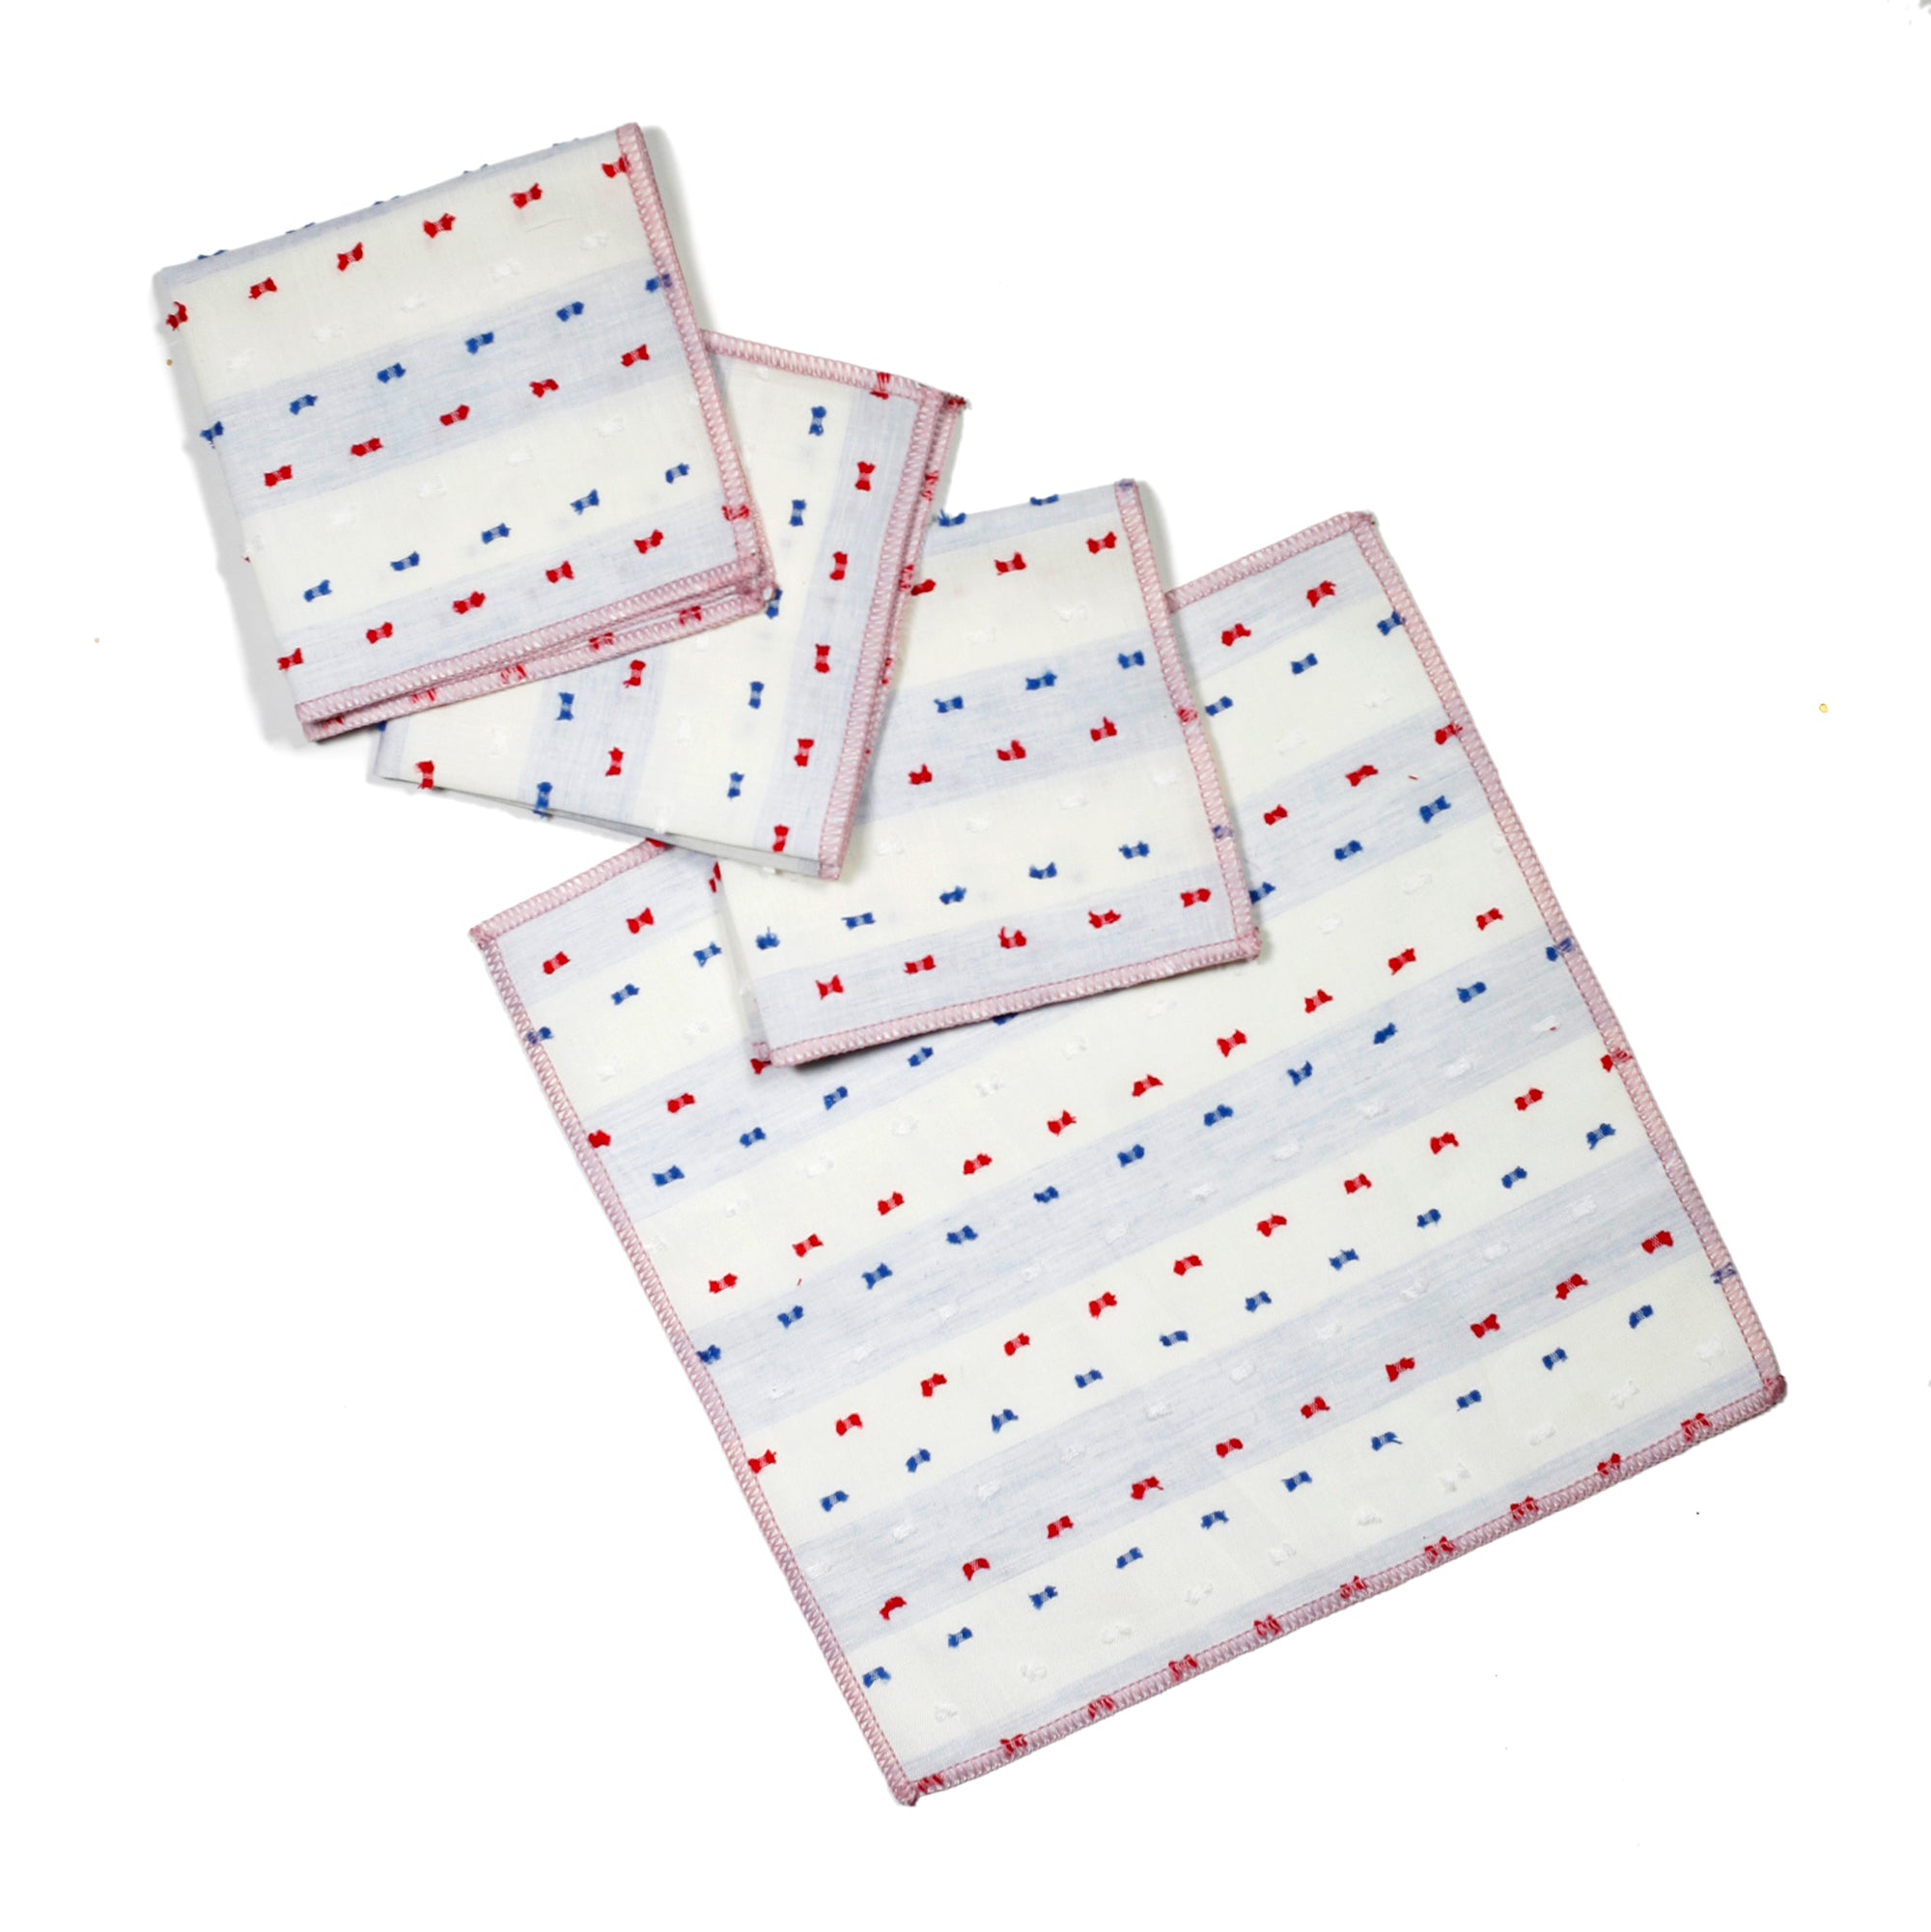 Bows Adorable Primary Color Cocktail Napkins, Set of 4